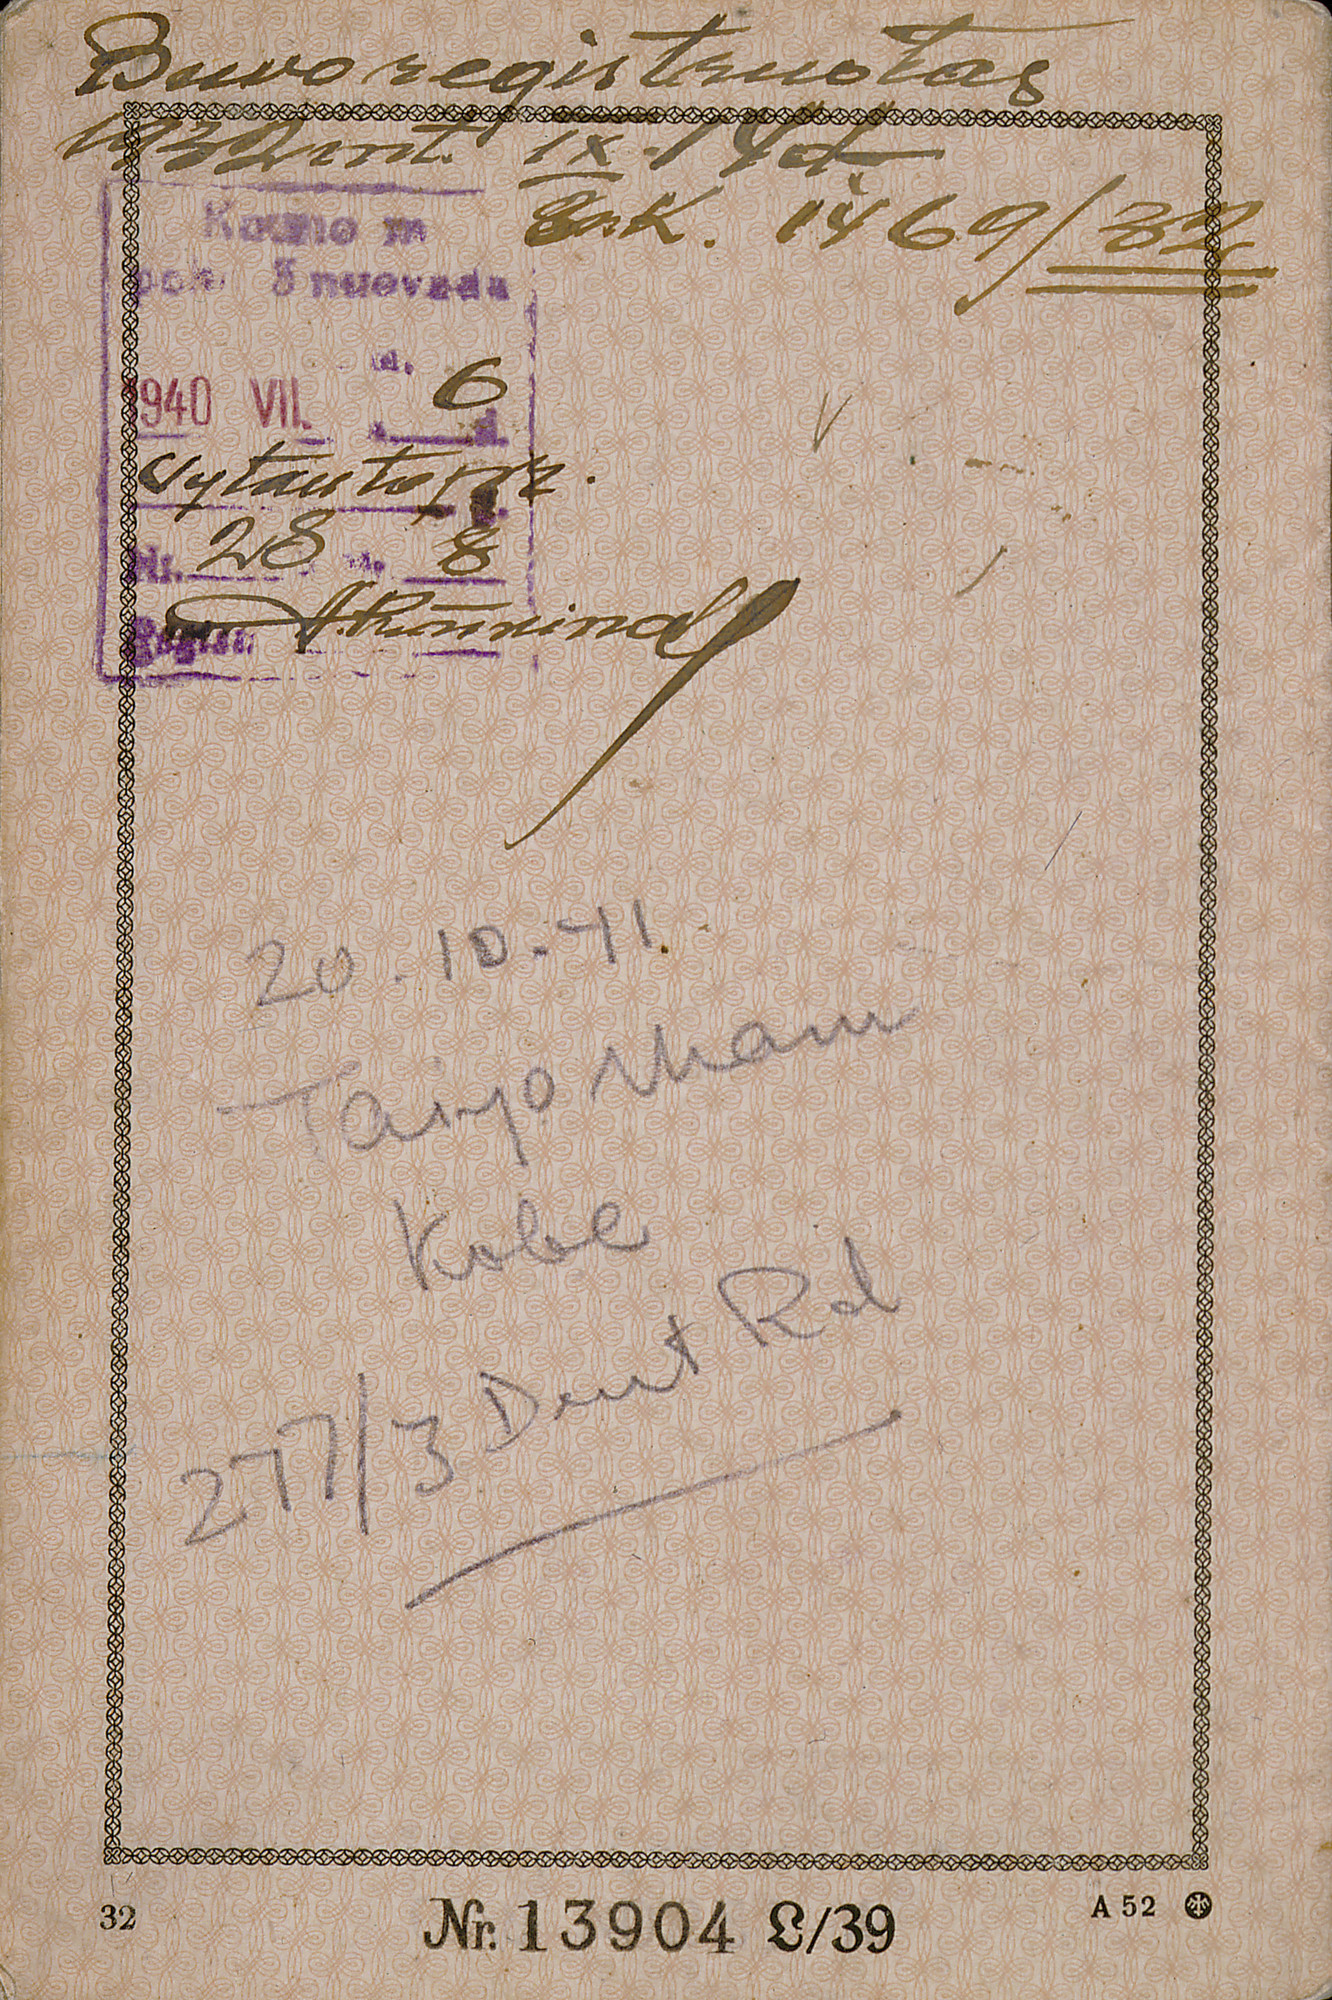 Page of the passport Moritz Sondheimer's passport issued by the German Consulate in Kaunas.

German Jews were commonly required to add "Israel" to their names if male, and "Sara" if female.  Jewish passports were further distinguished by a "J," signifying "Jude" (Jew), stamped in red on the first page.